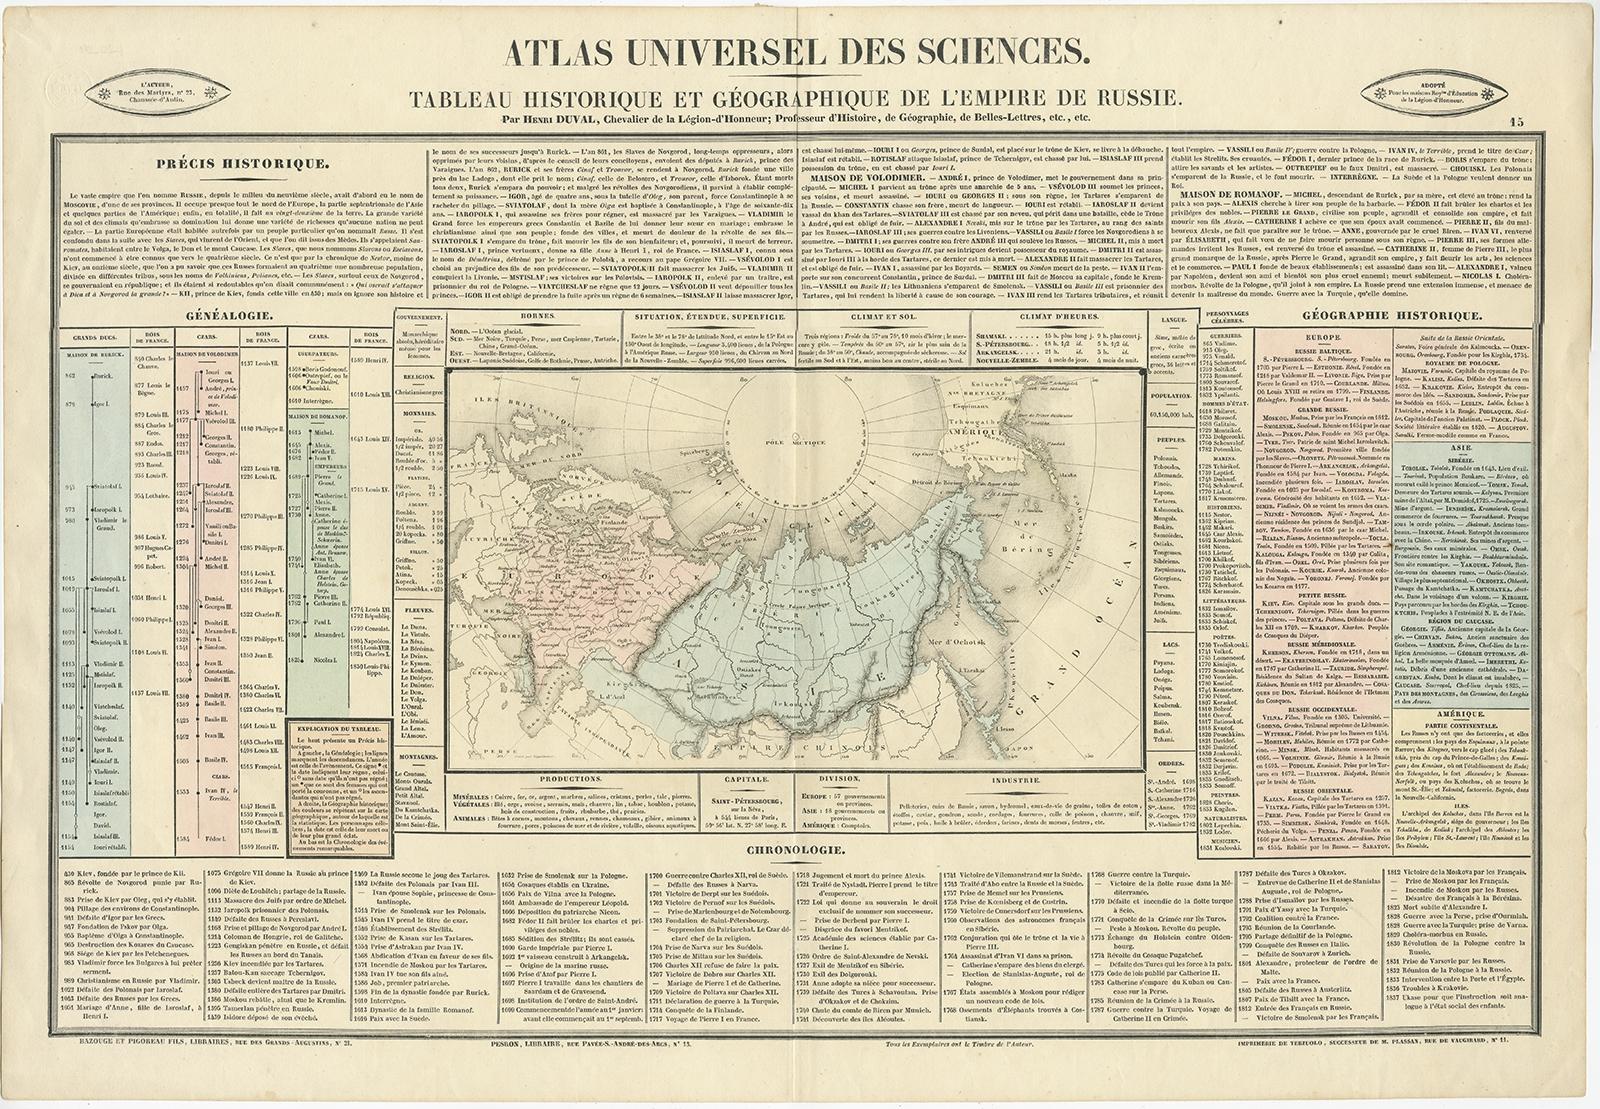 Antique map titled 'Tableau Historique et Géographique de L'Empire de Russie'. 

Original antique map of the Russian Empire will detailed written information about the chronology, genealogy and geography. This map originates from 'Atlas Universel